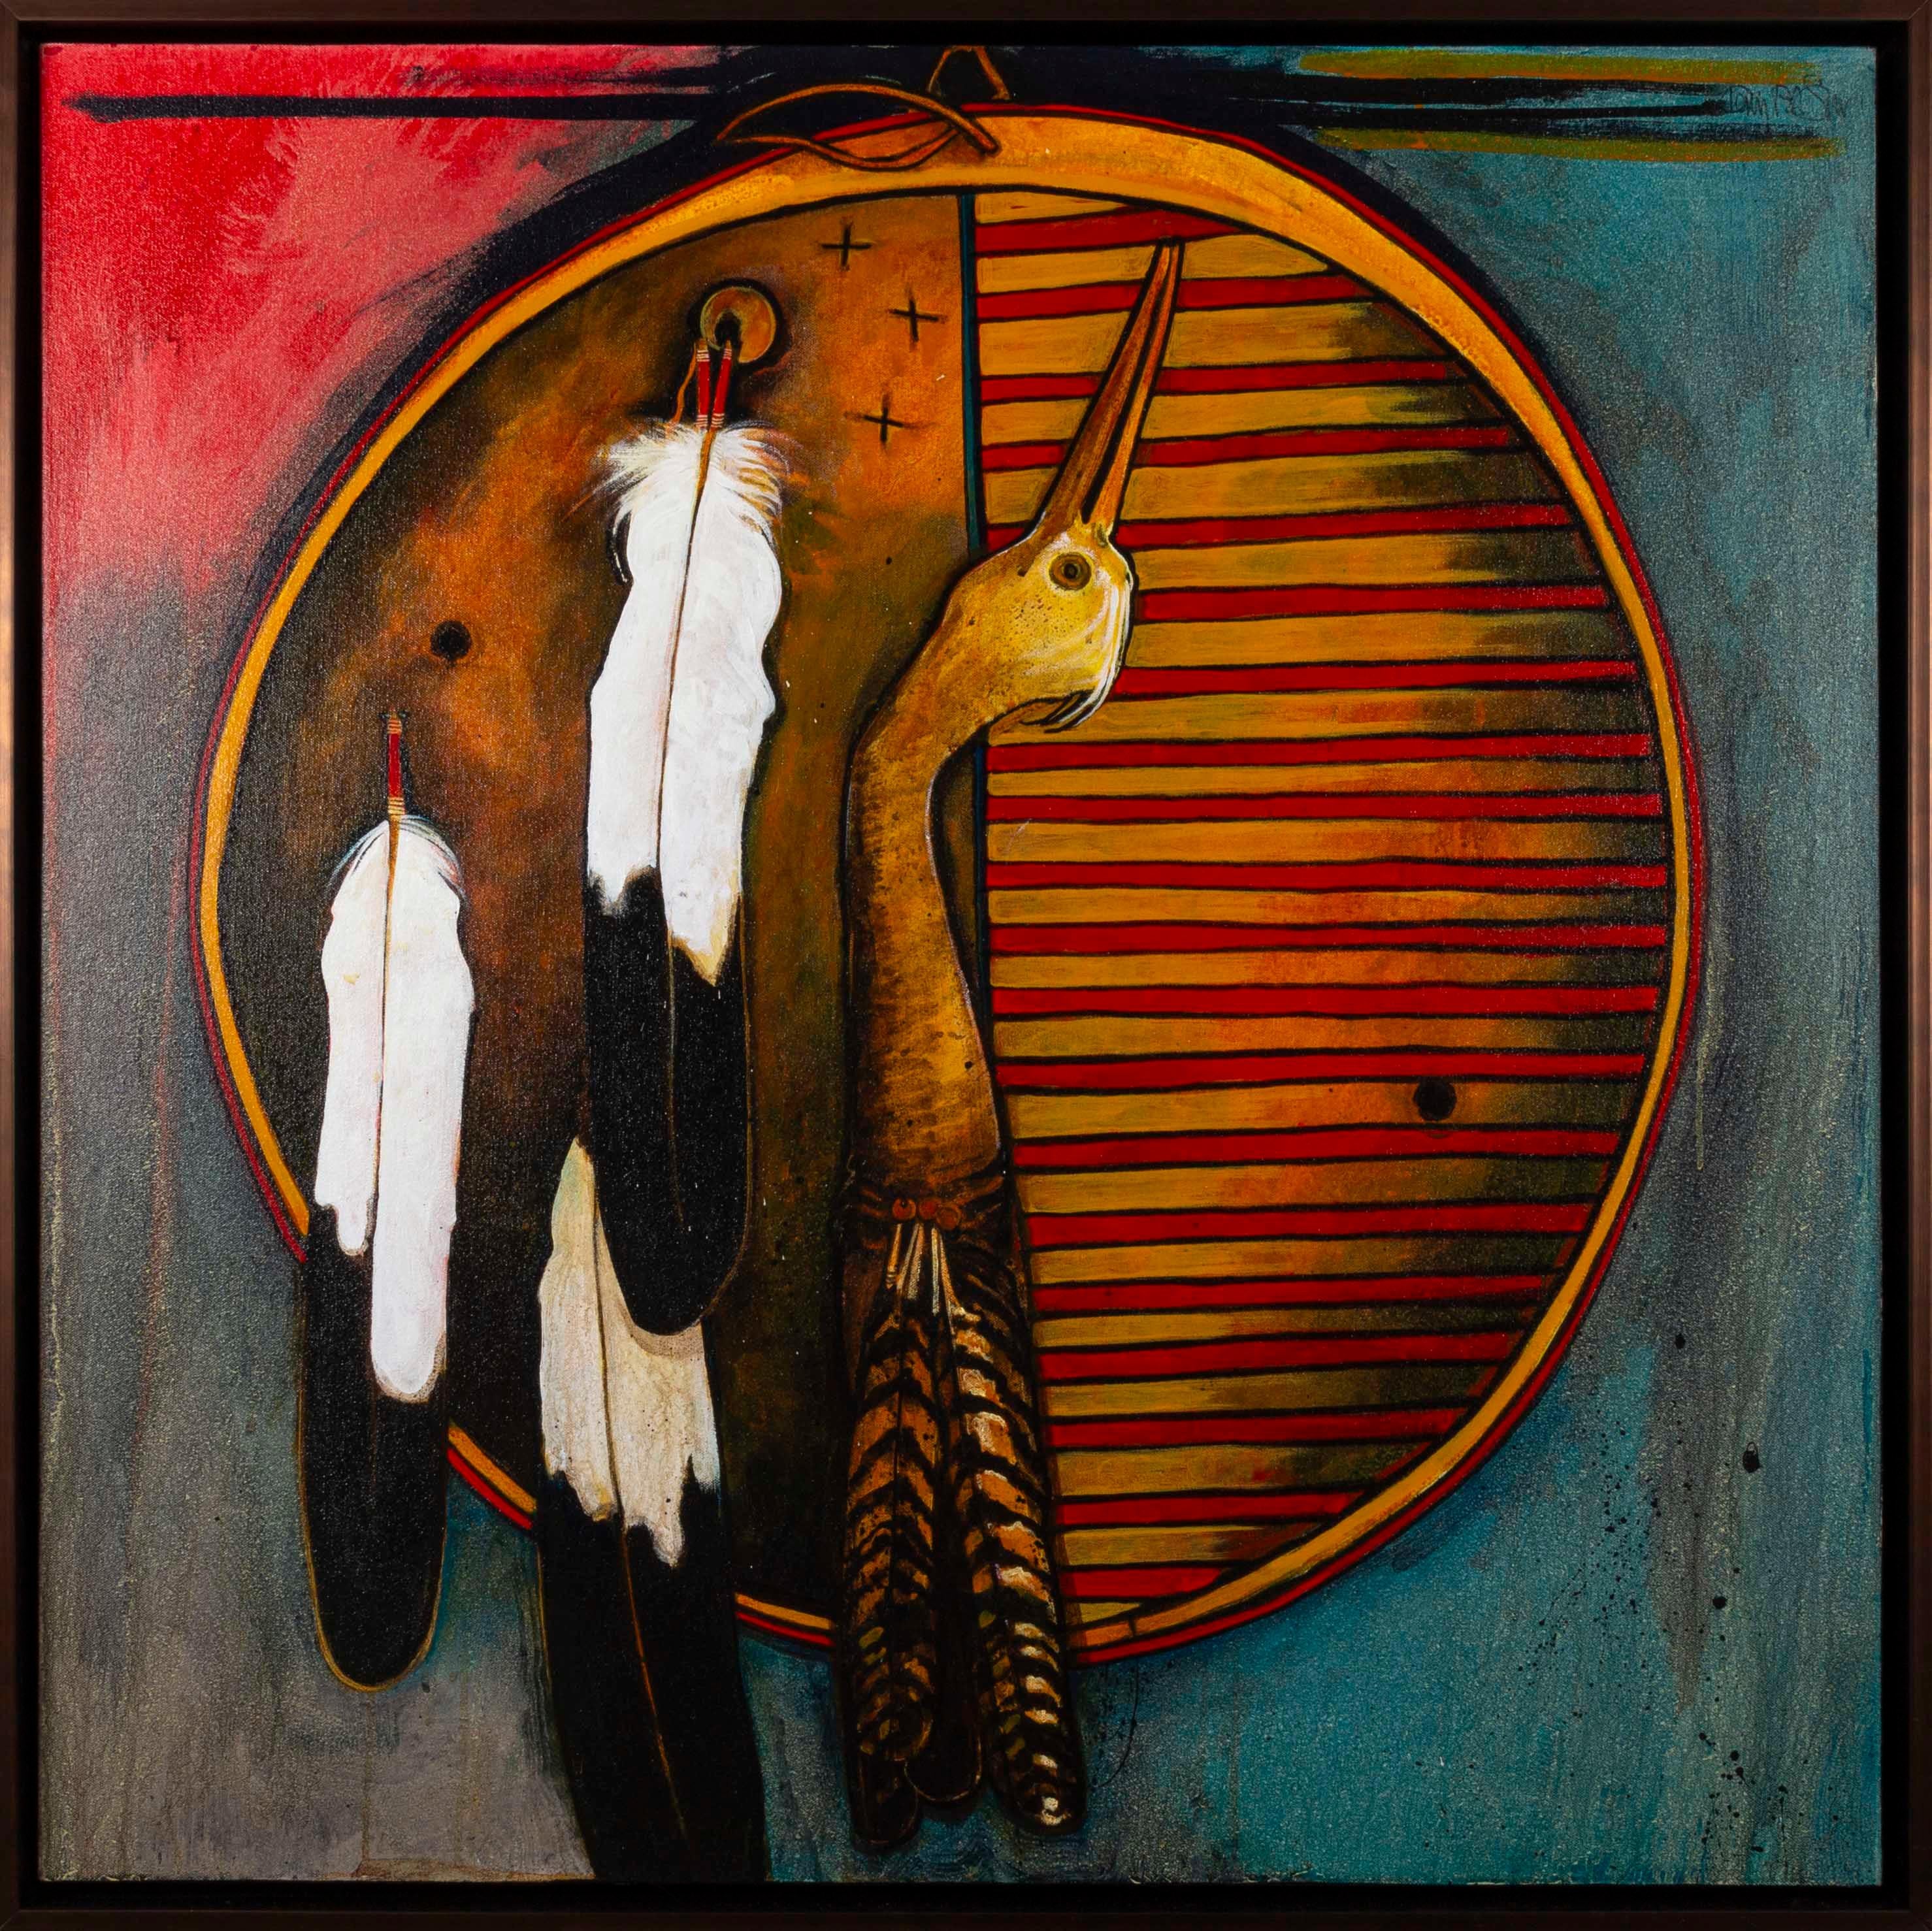 Sunset Crane Shield Original Kevin Red Star Crow Indian Native American Painting